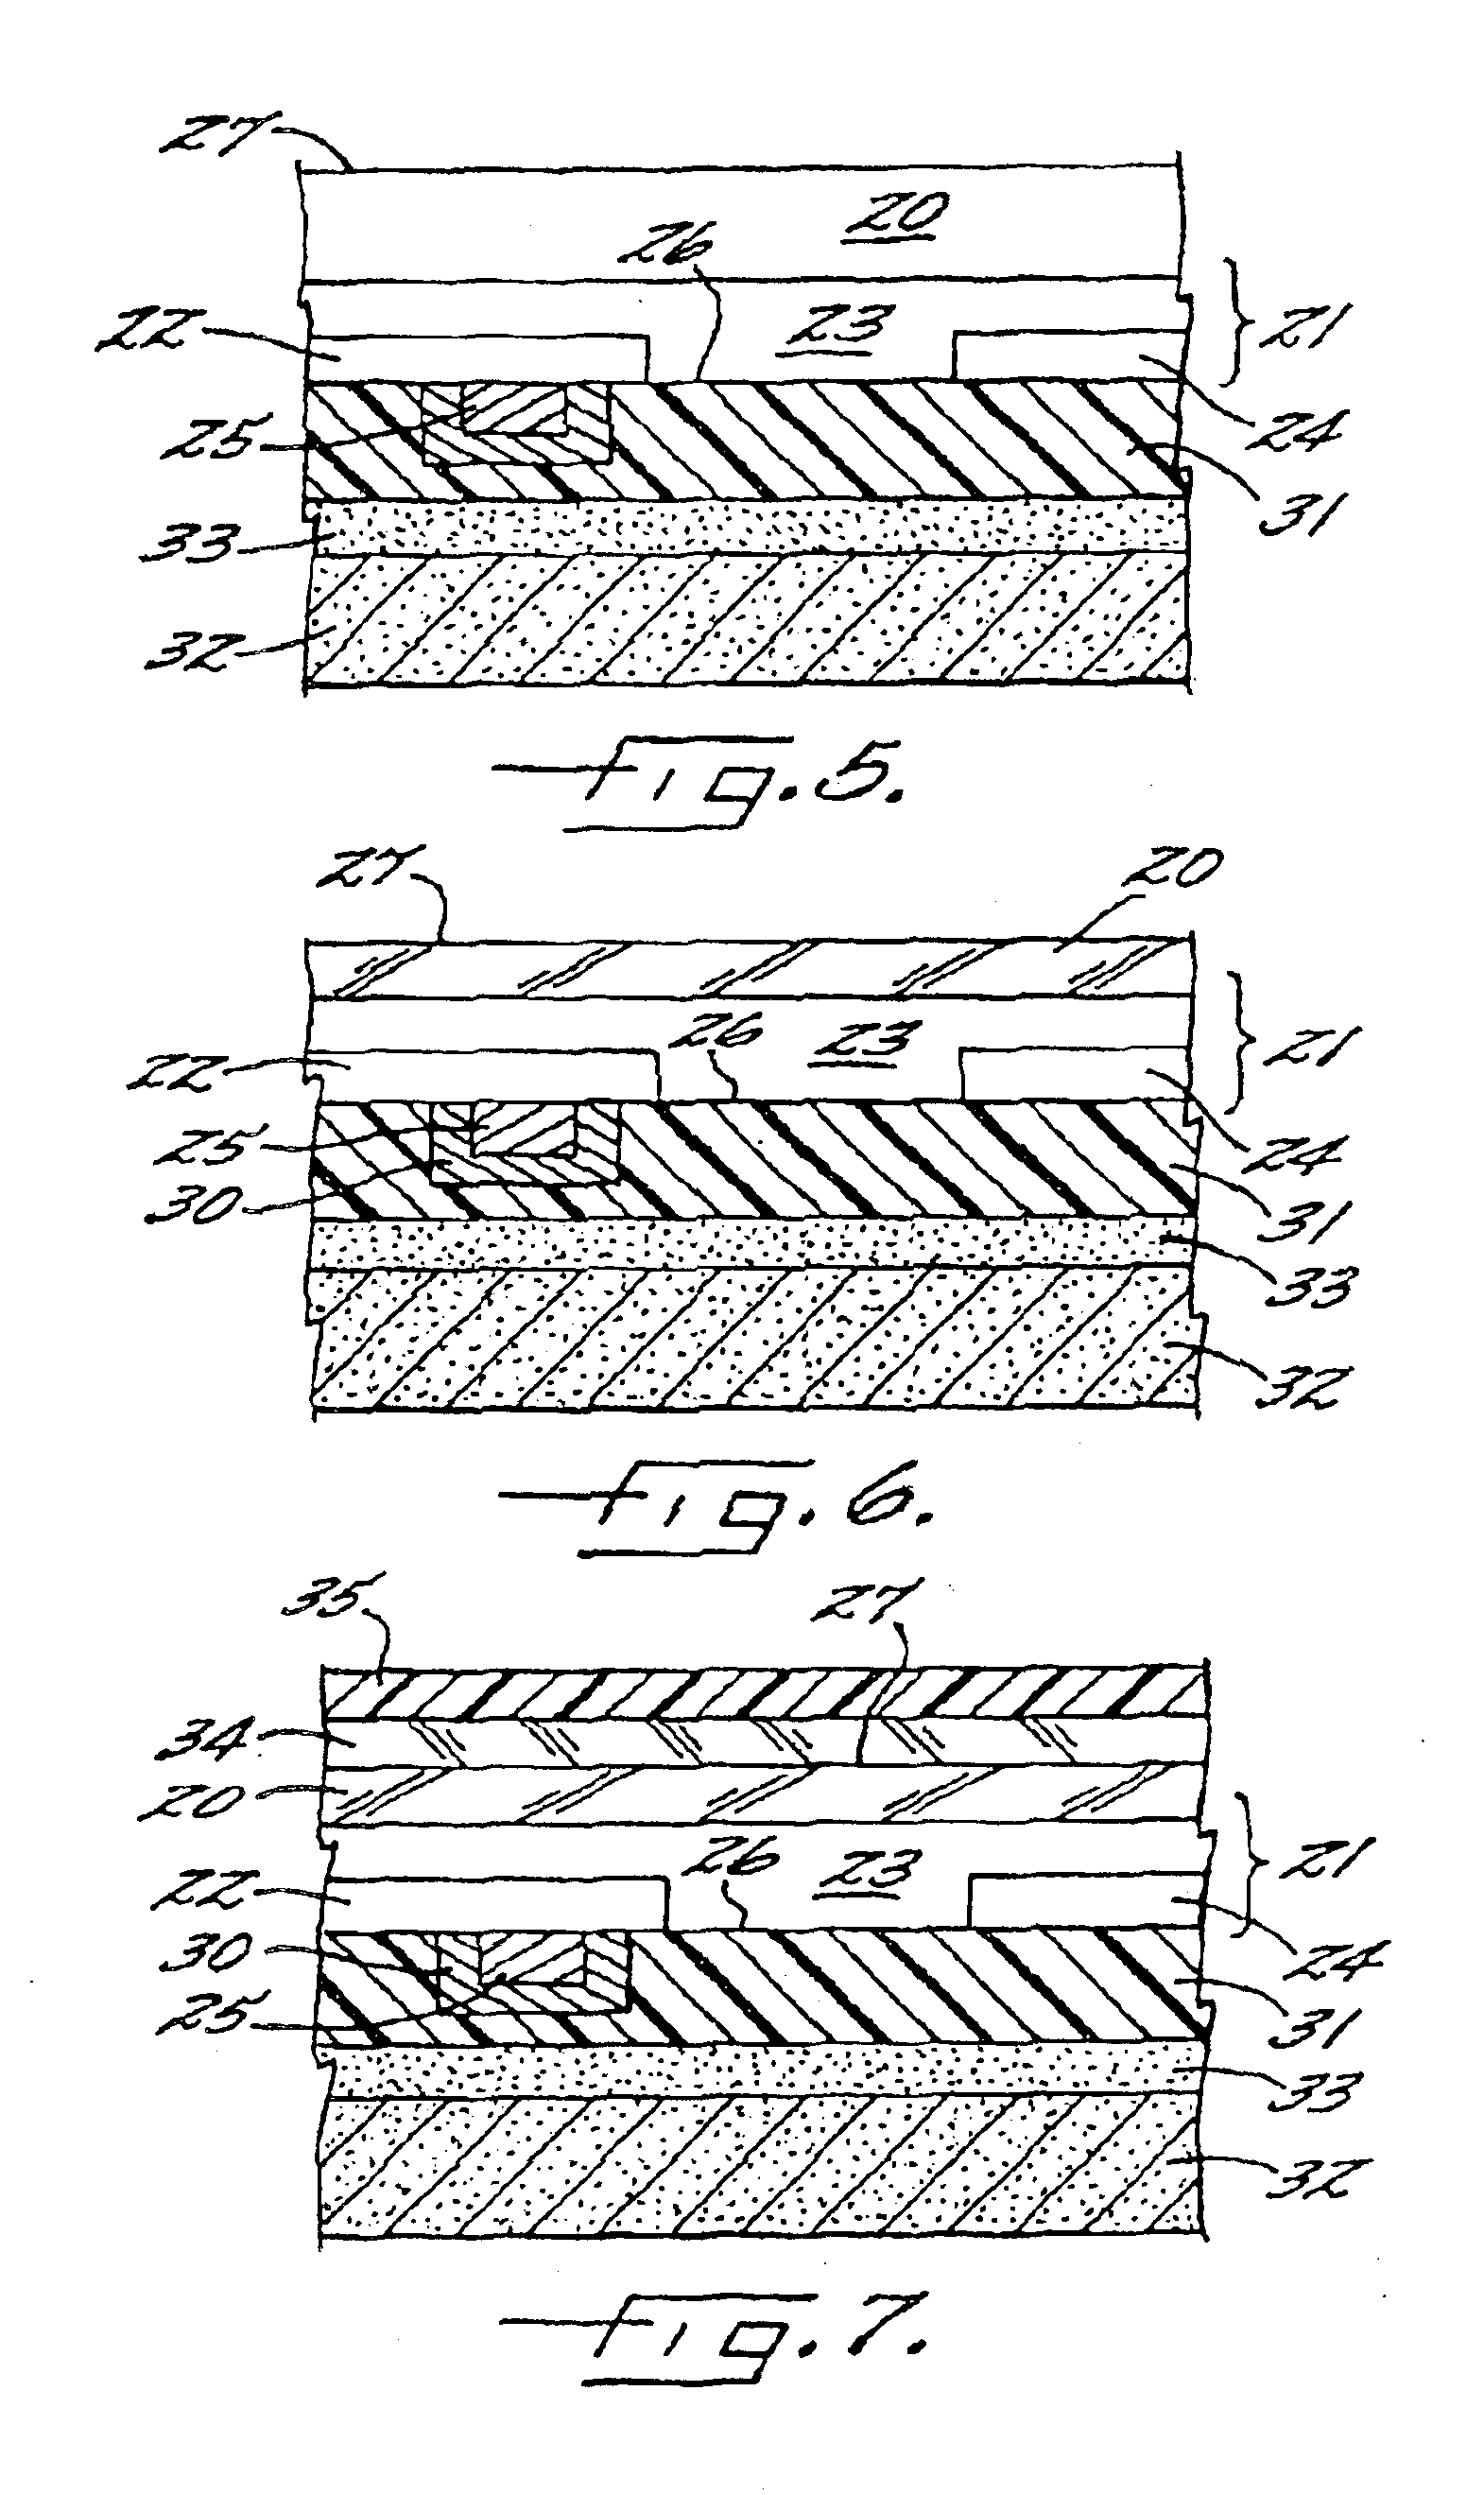 Layered semiconductor devices with conductive vias